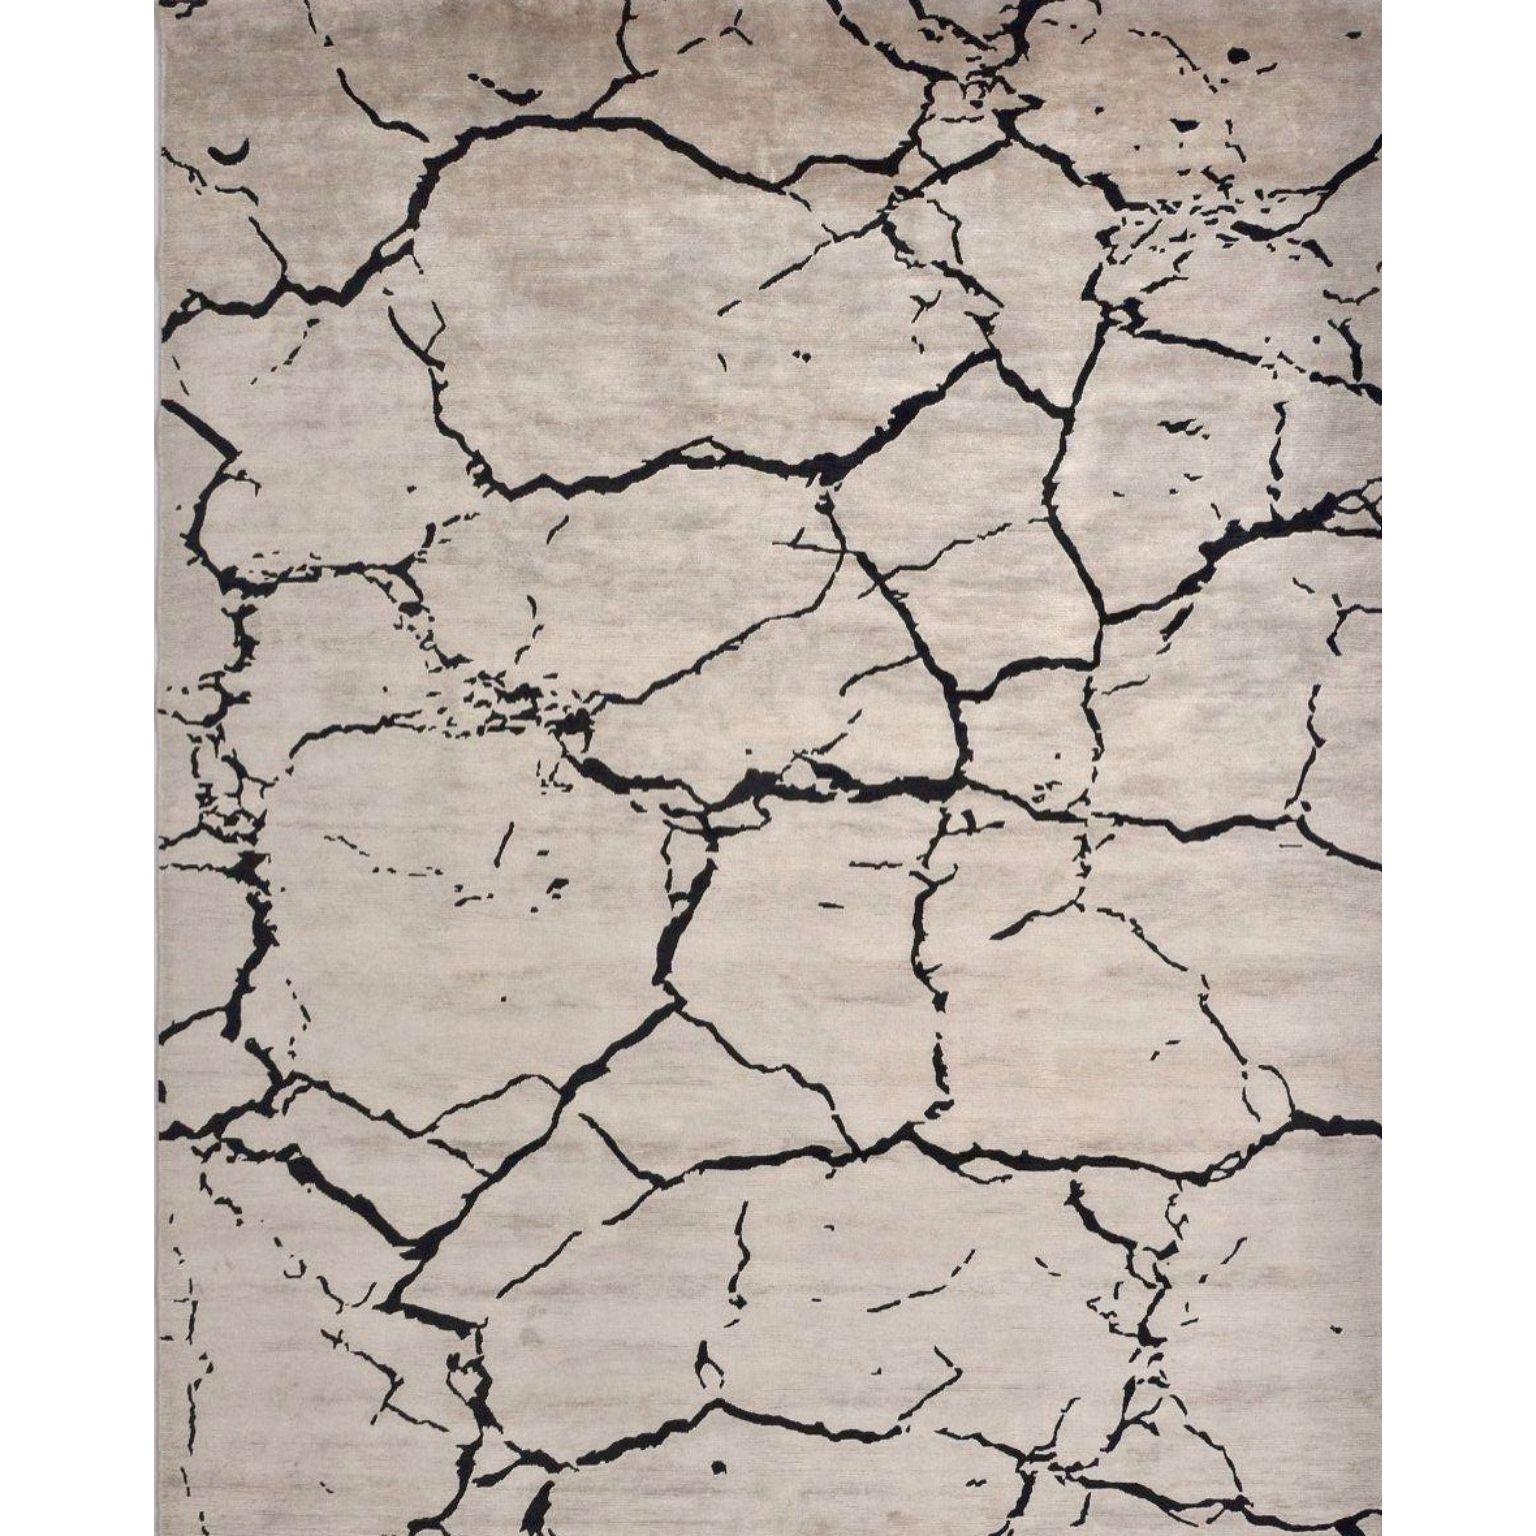 Concrete large rug by Art & Loom
Dimensions: D304.8 x H426.7 cm
Materials: 50% New Zealand wool-50%, Chinese silk blend
Quality (Knots per Inch): 100
Also available in different dimensions.

Samantha Gallacher has always had a keen eye for